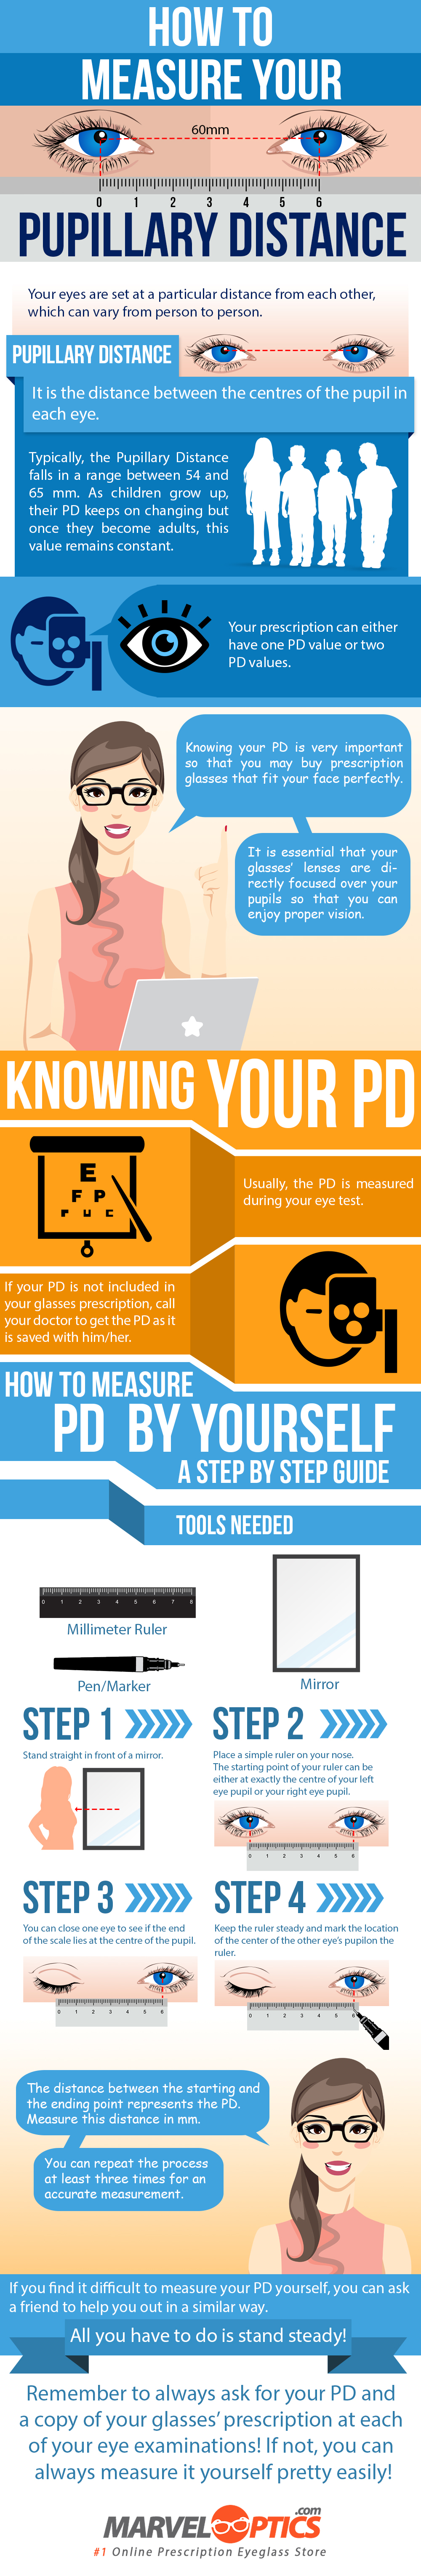 How to Measure Your PD